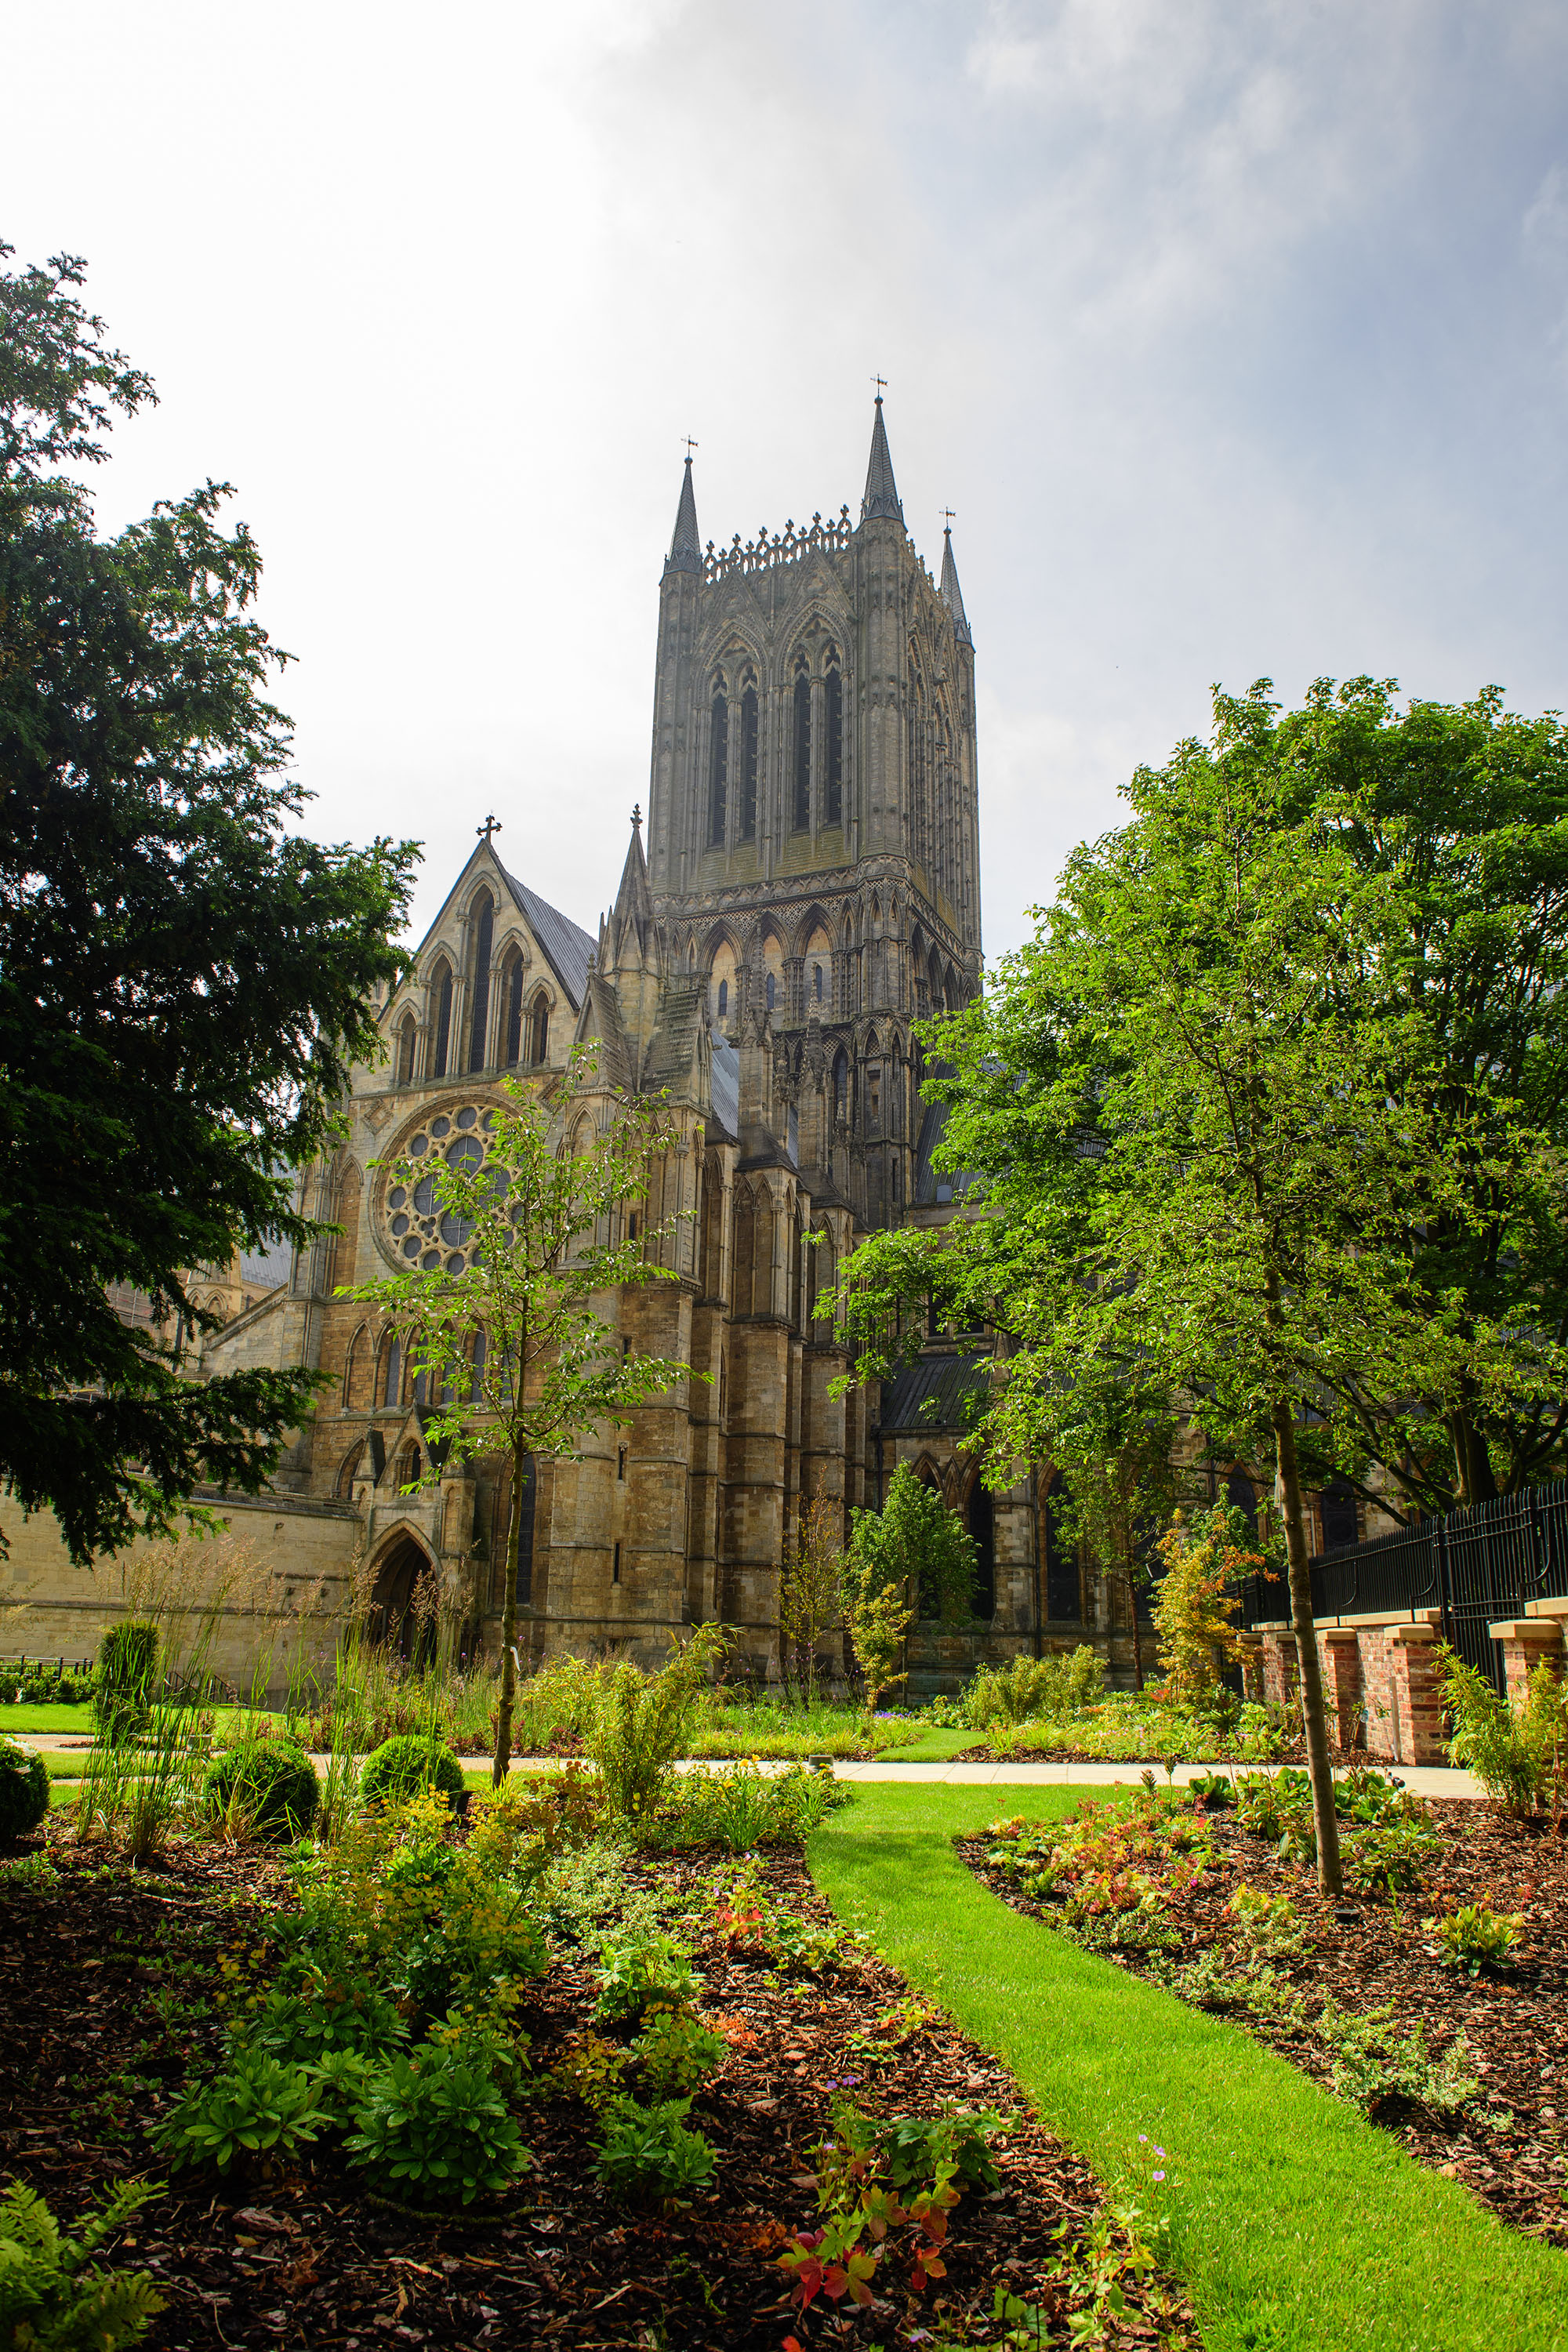 Lincoln Cathedral Didyouknow In 1311 Lincoln Cathedral Became The Tallest Building In The World Beating The Great Egyptian Pyramids The Cathedral Held Onto The Title For A Whopping 250 Years